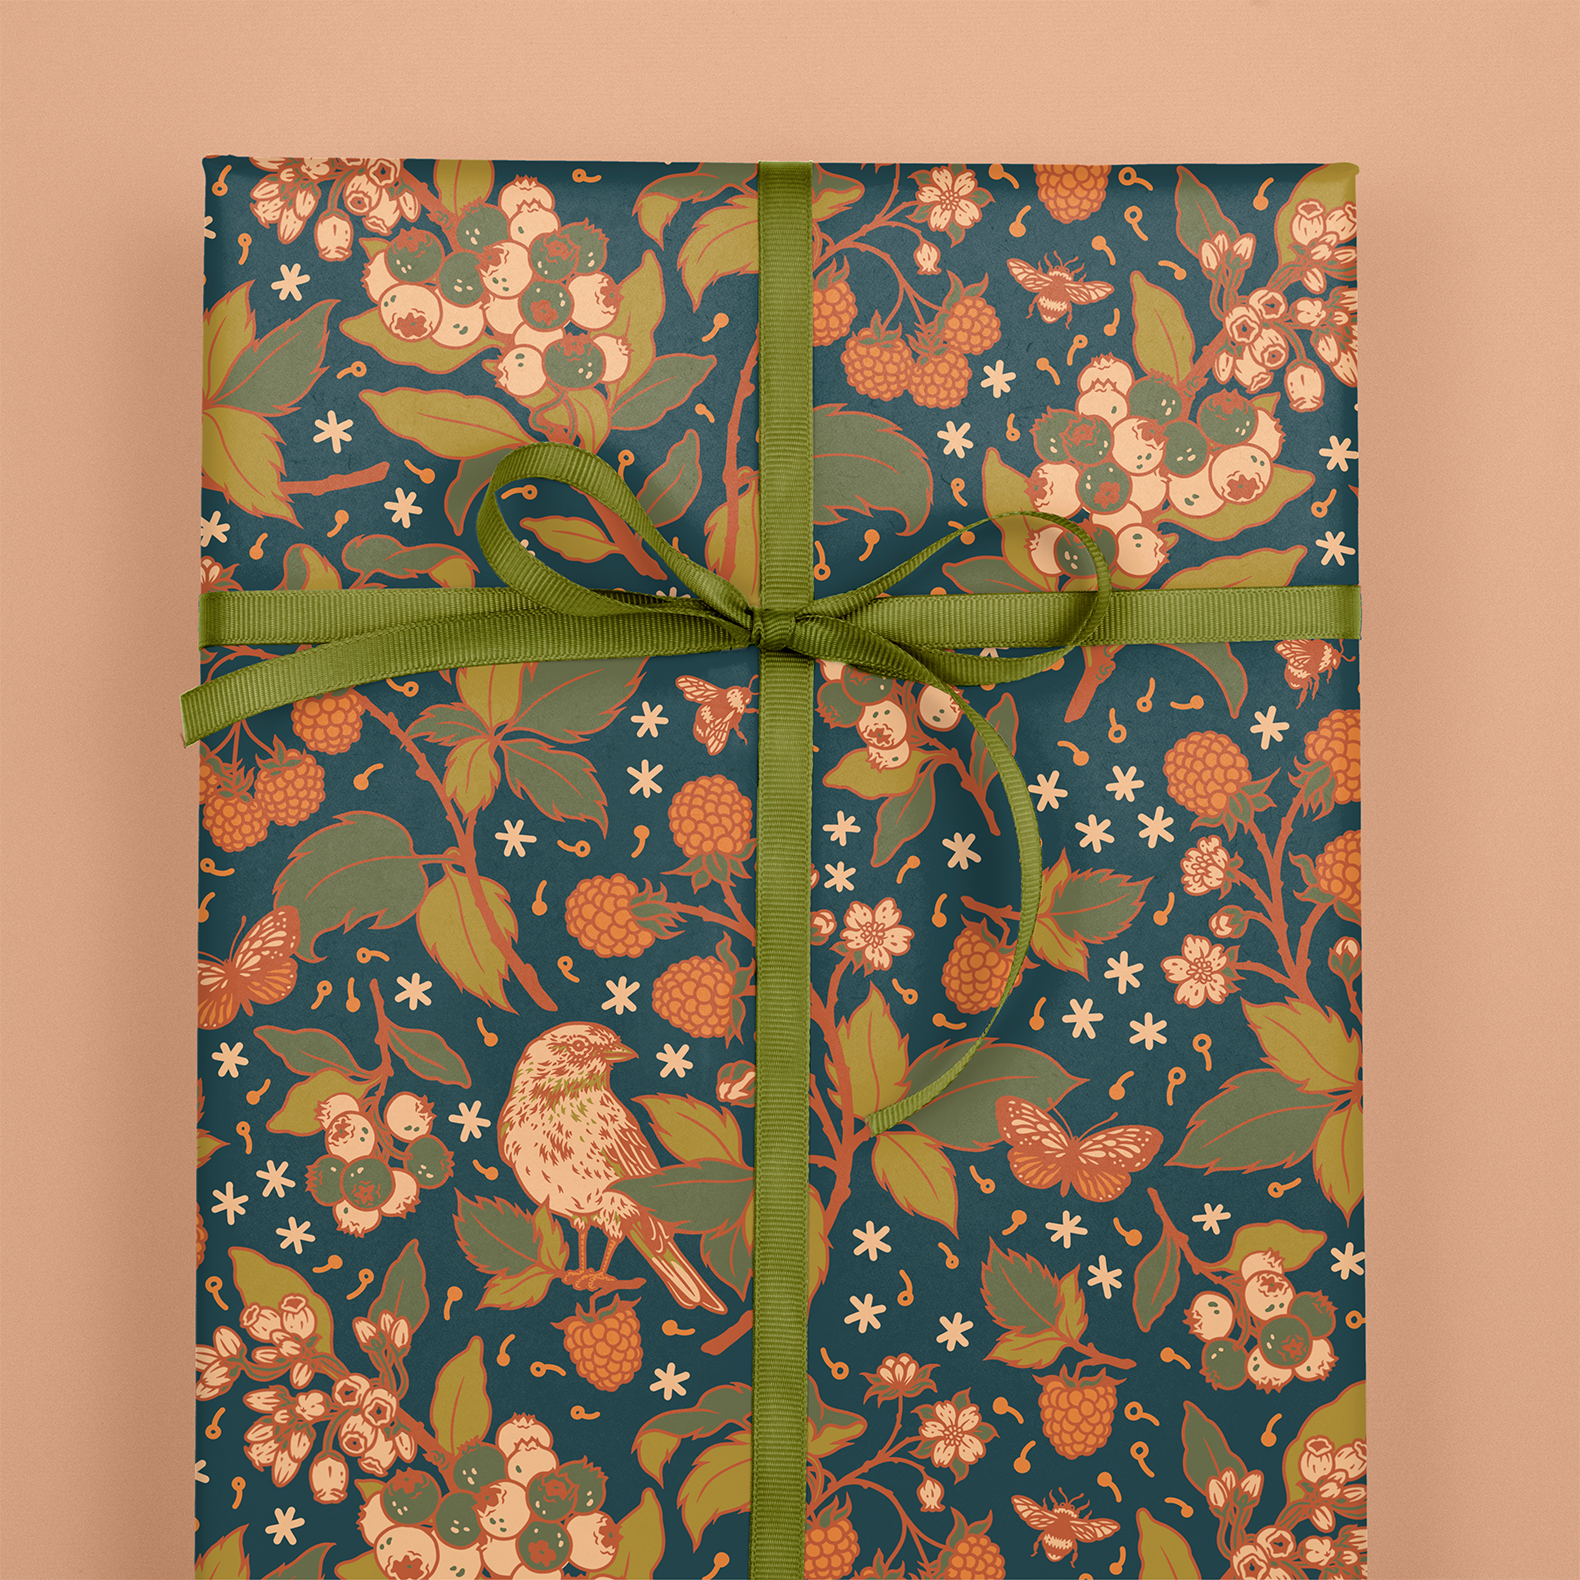 Recyclable Gift Wrap / Wrapping Paper: Berries